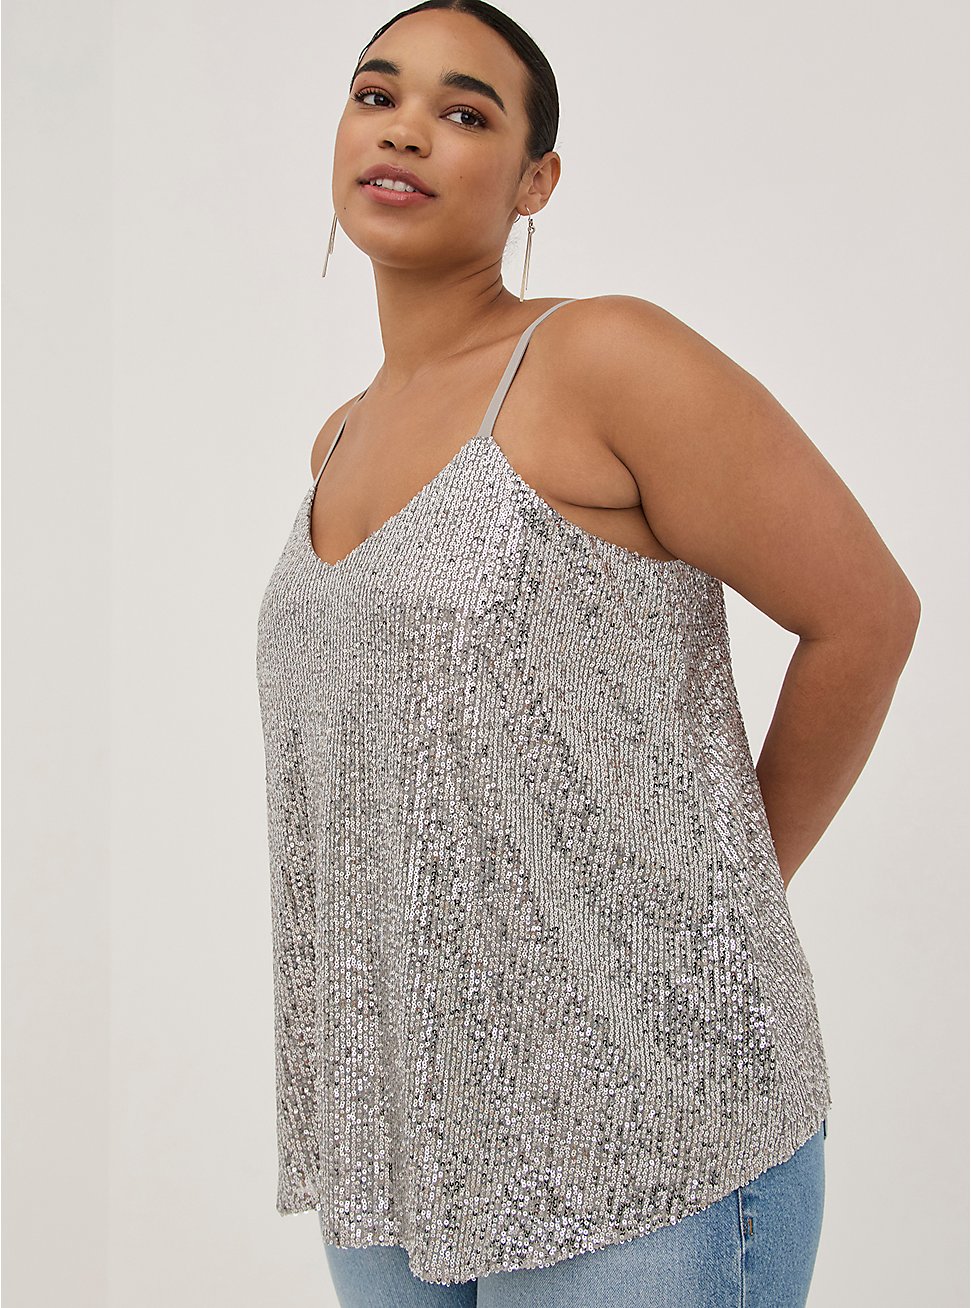 Sophie - Silver Sequined Swing Cami, SILVER, hi-res